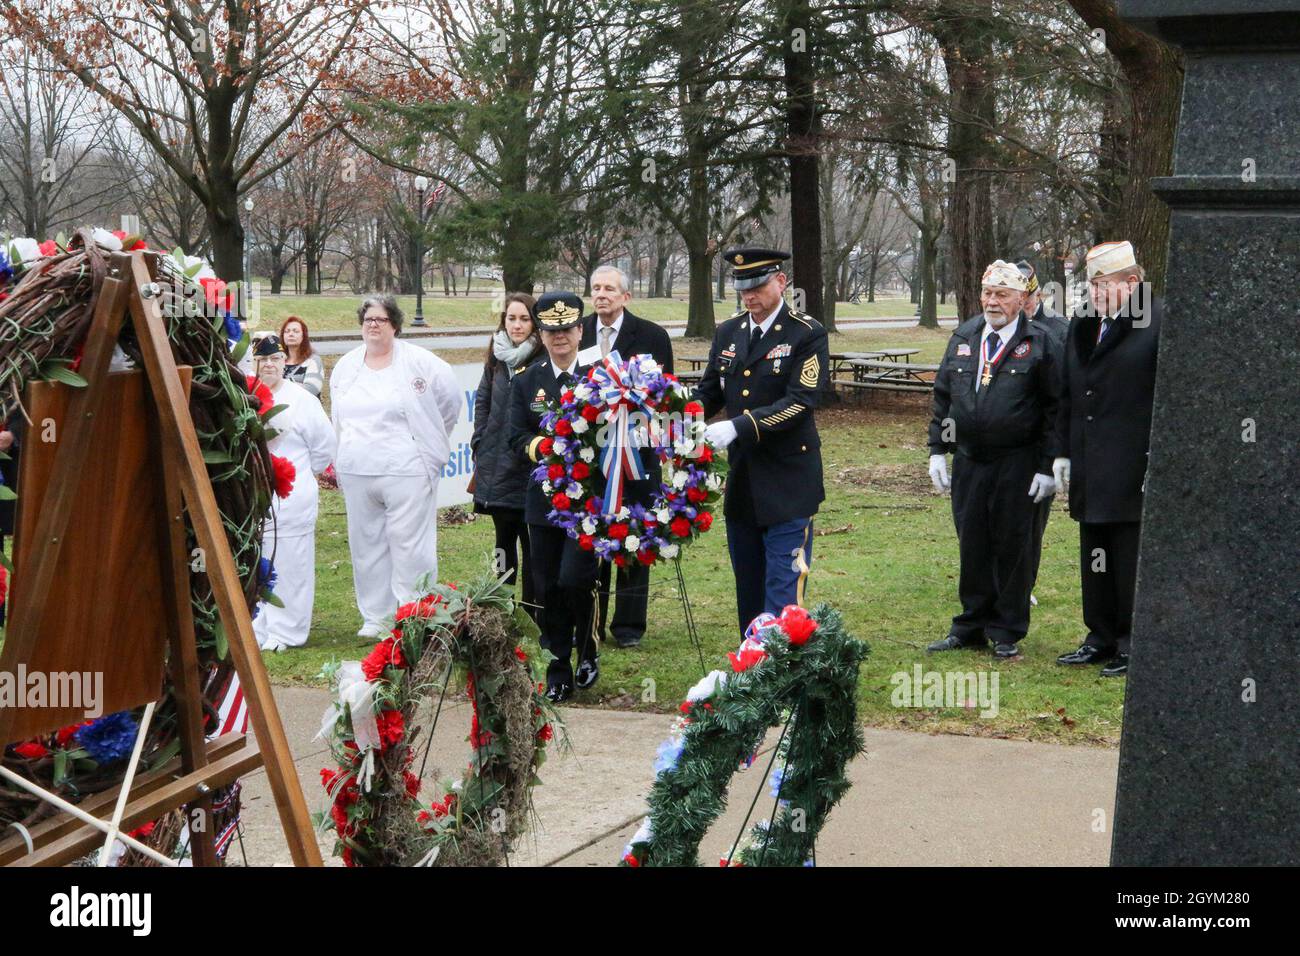 CANTON, Ohio – Brigadier Gen. Cheryn Fasano, center left, commander of the 310th Expeditionary Sustainment Command, and Command Sgt. Maj. Keith Gwin, center right, senior enlisted advisor, 310th ESC, prepare to place a wreath on behalf of President Donald J. Trump during a ceremony honoring the 25th President of the United States, William McKinley, Jan. 25, 2020, in Canton, Ohio. The annual ceremony features eight separate wreaths honoring different aspects of the life and service of McKinley, who served as president from 1897 until his assassination in 1901. Prior to that, McKinley was a Sold Stock Photo